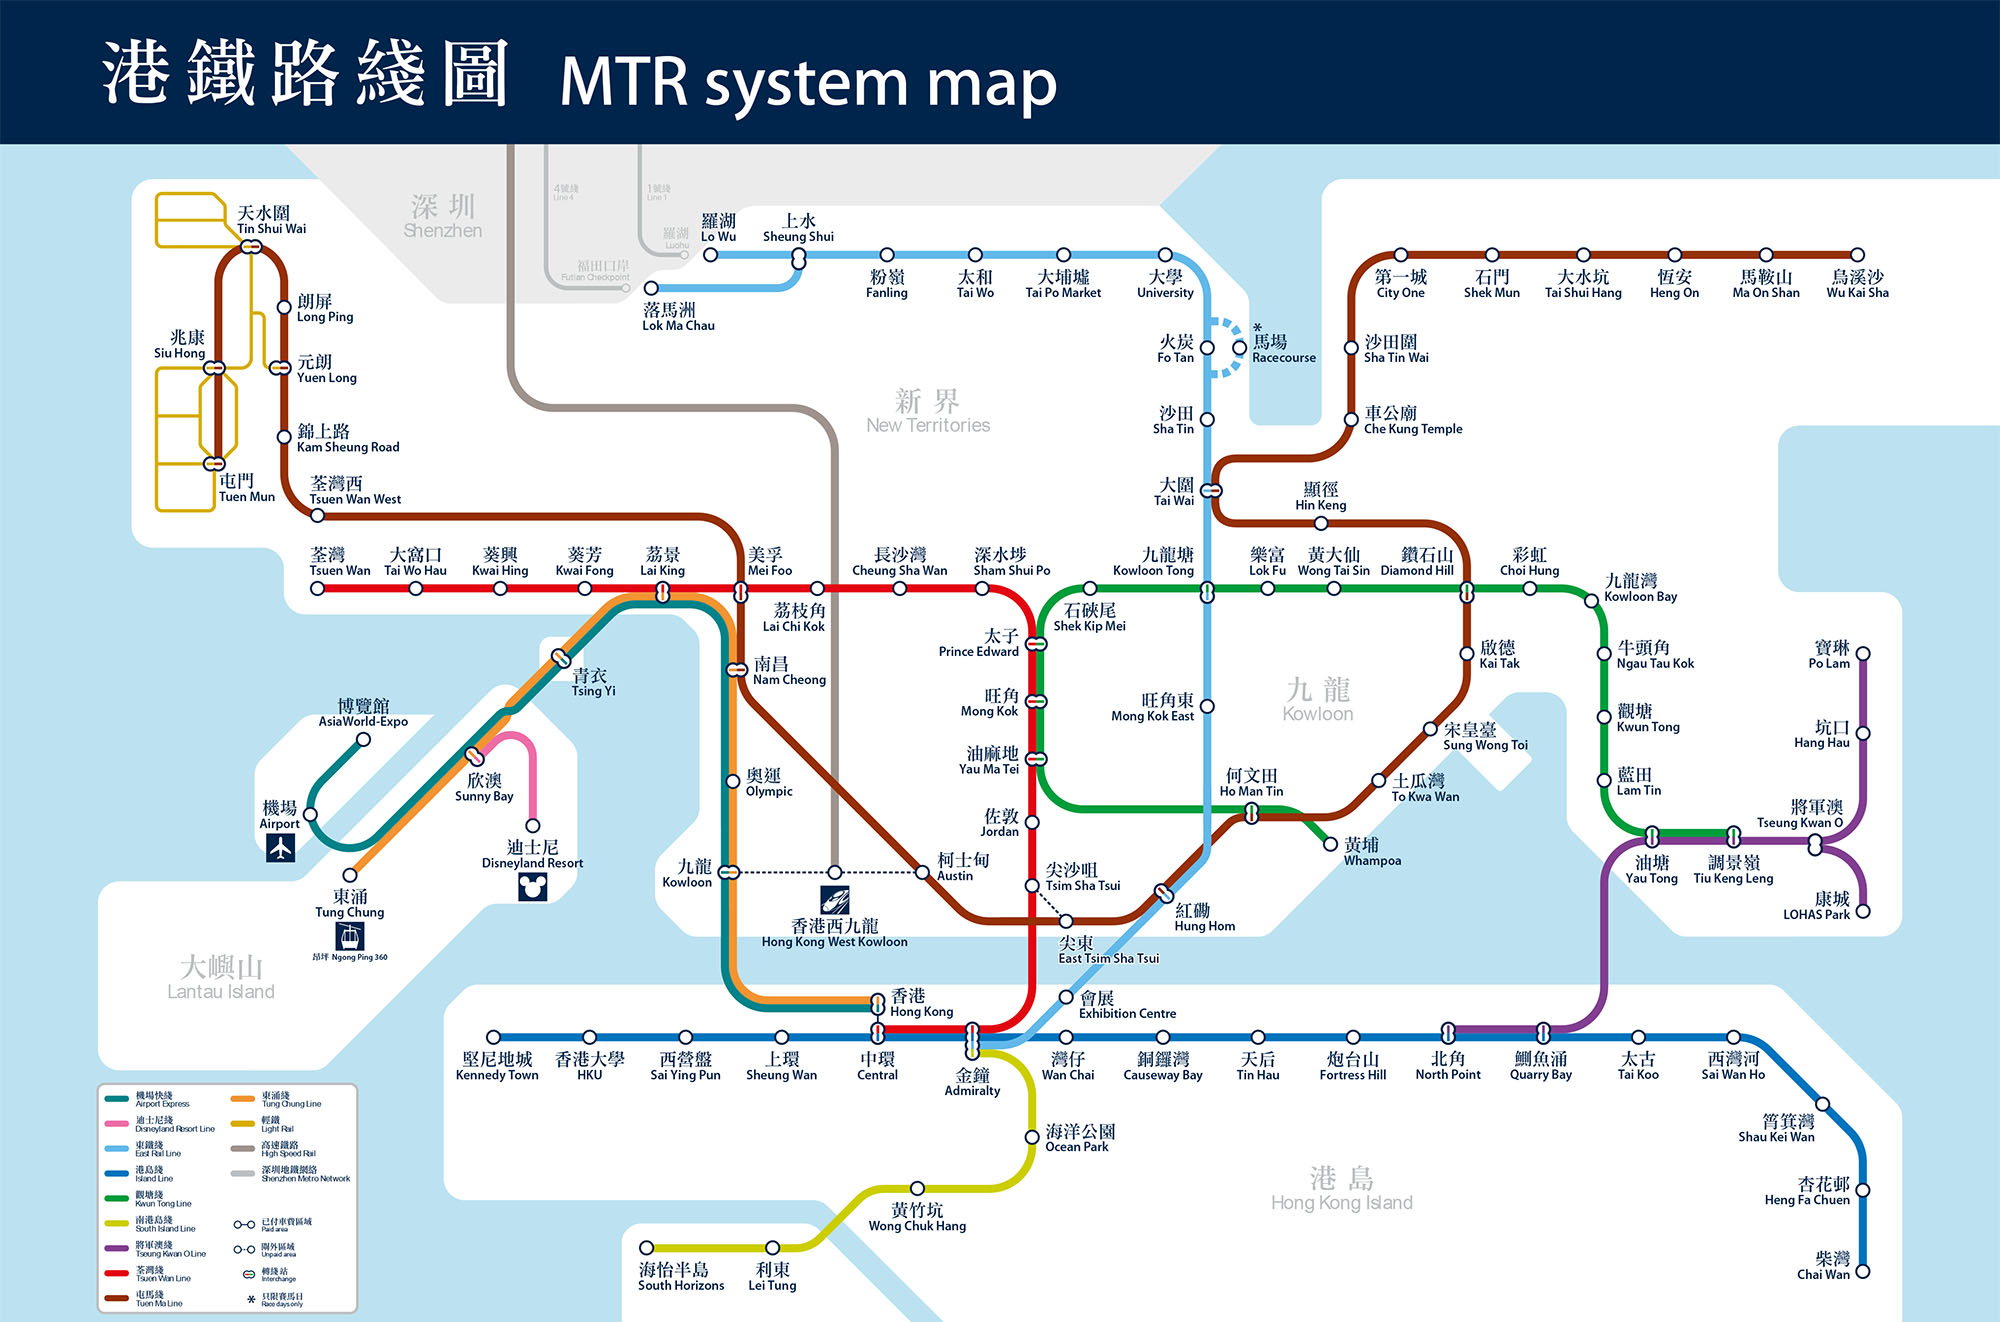 The MTR map is not designed in scale to reflect actual distance